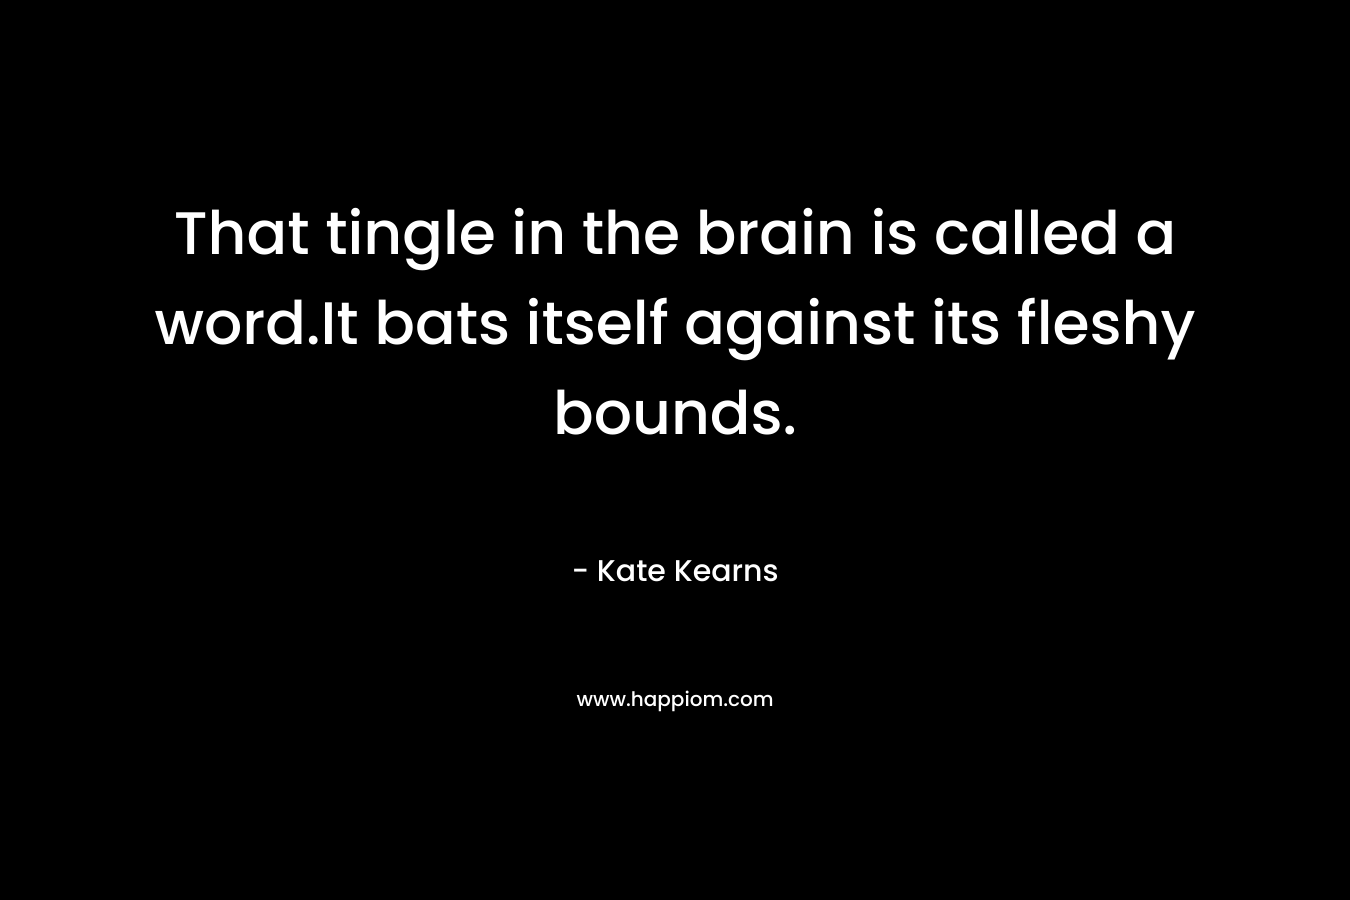 That tingle in the brain is called a word.It bats itself against its fleshy bounds.